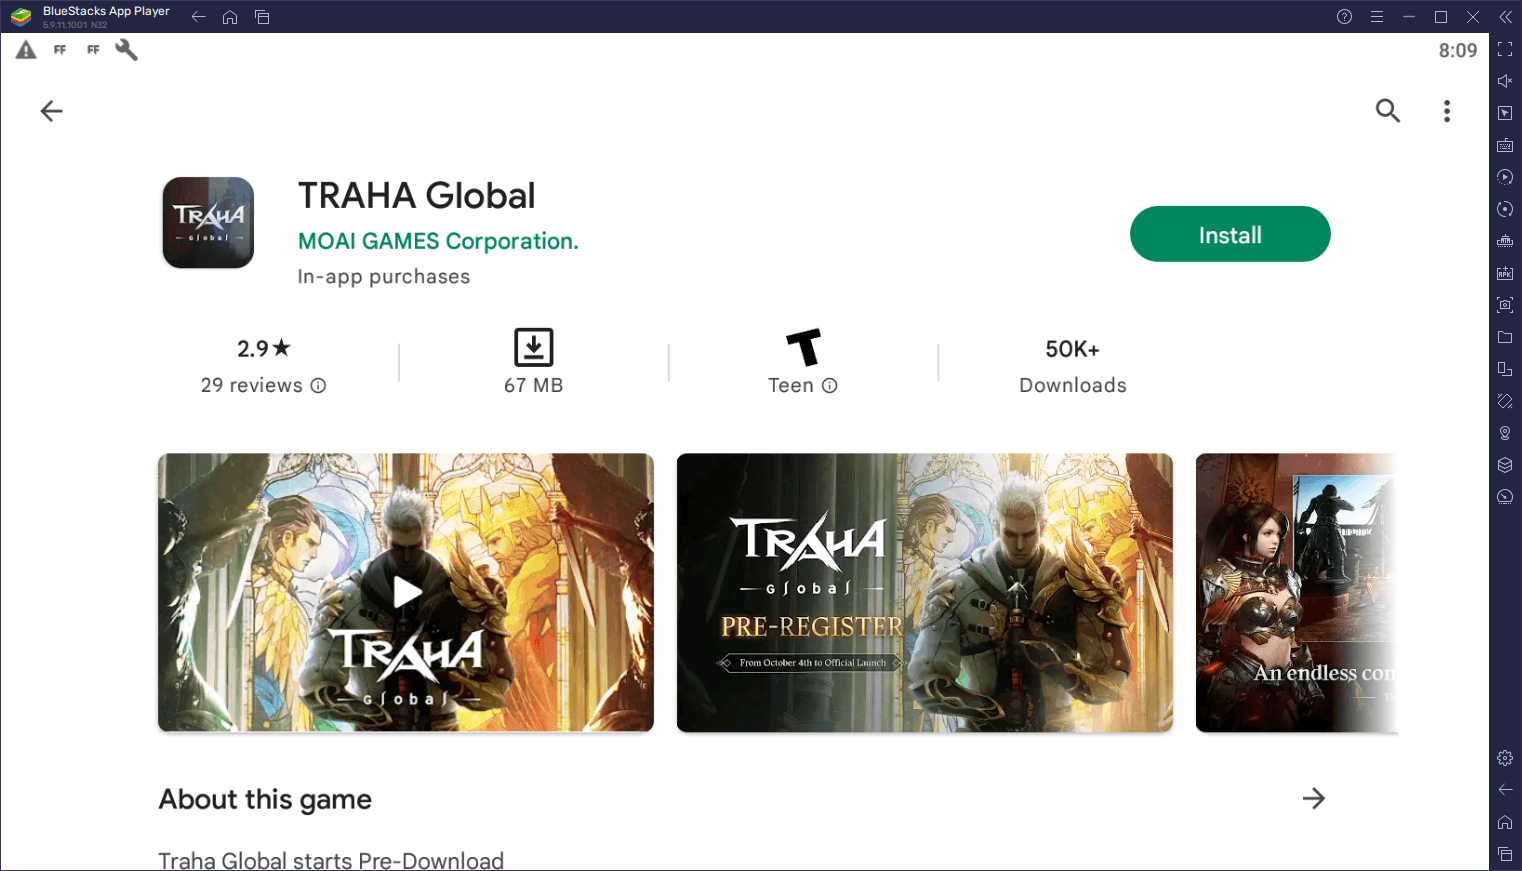 How to Play TRAHA Global on PC with BlueStacks